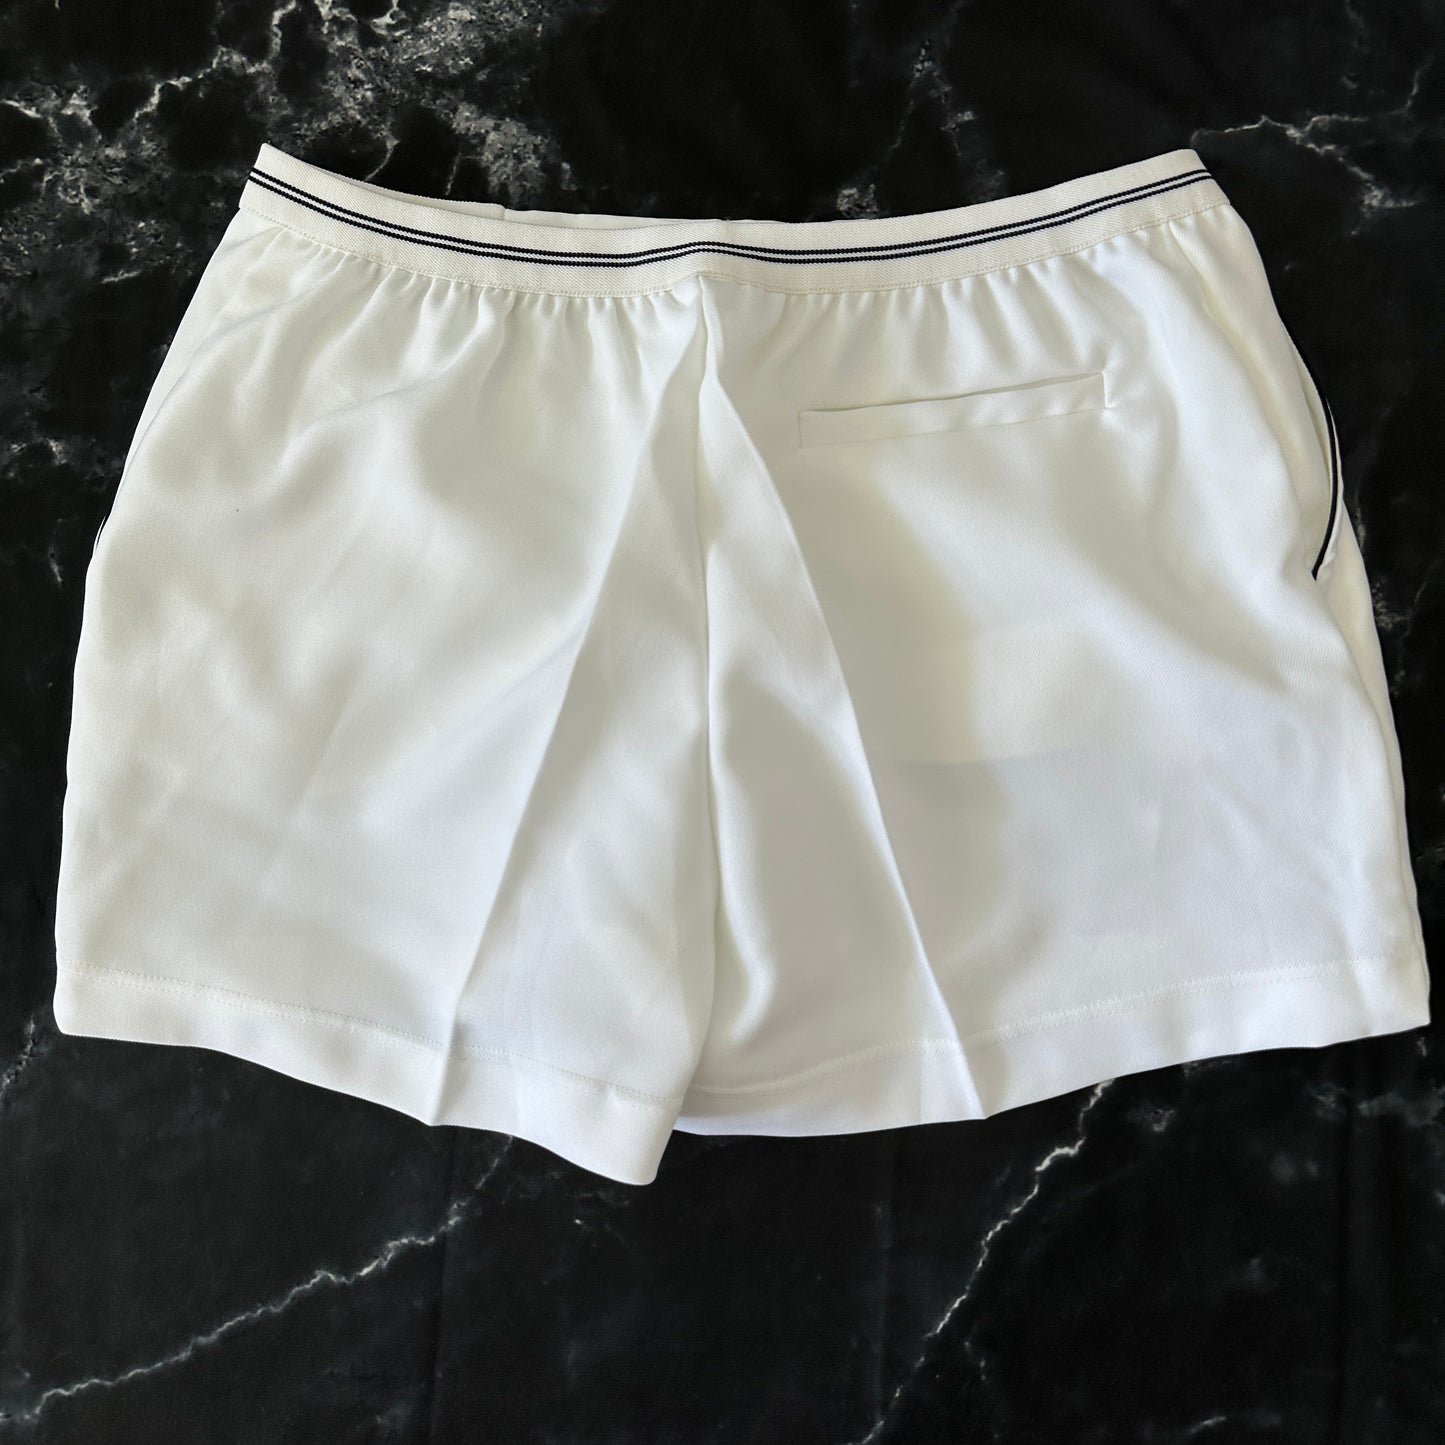 Campagnolo Sport Vintage 80s Tennis Shorts - White - 56 / M - Made in Italy